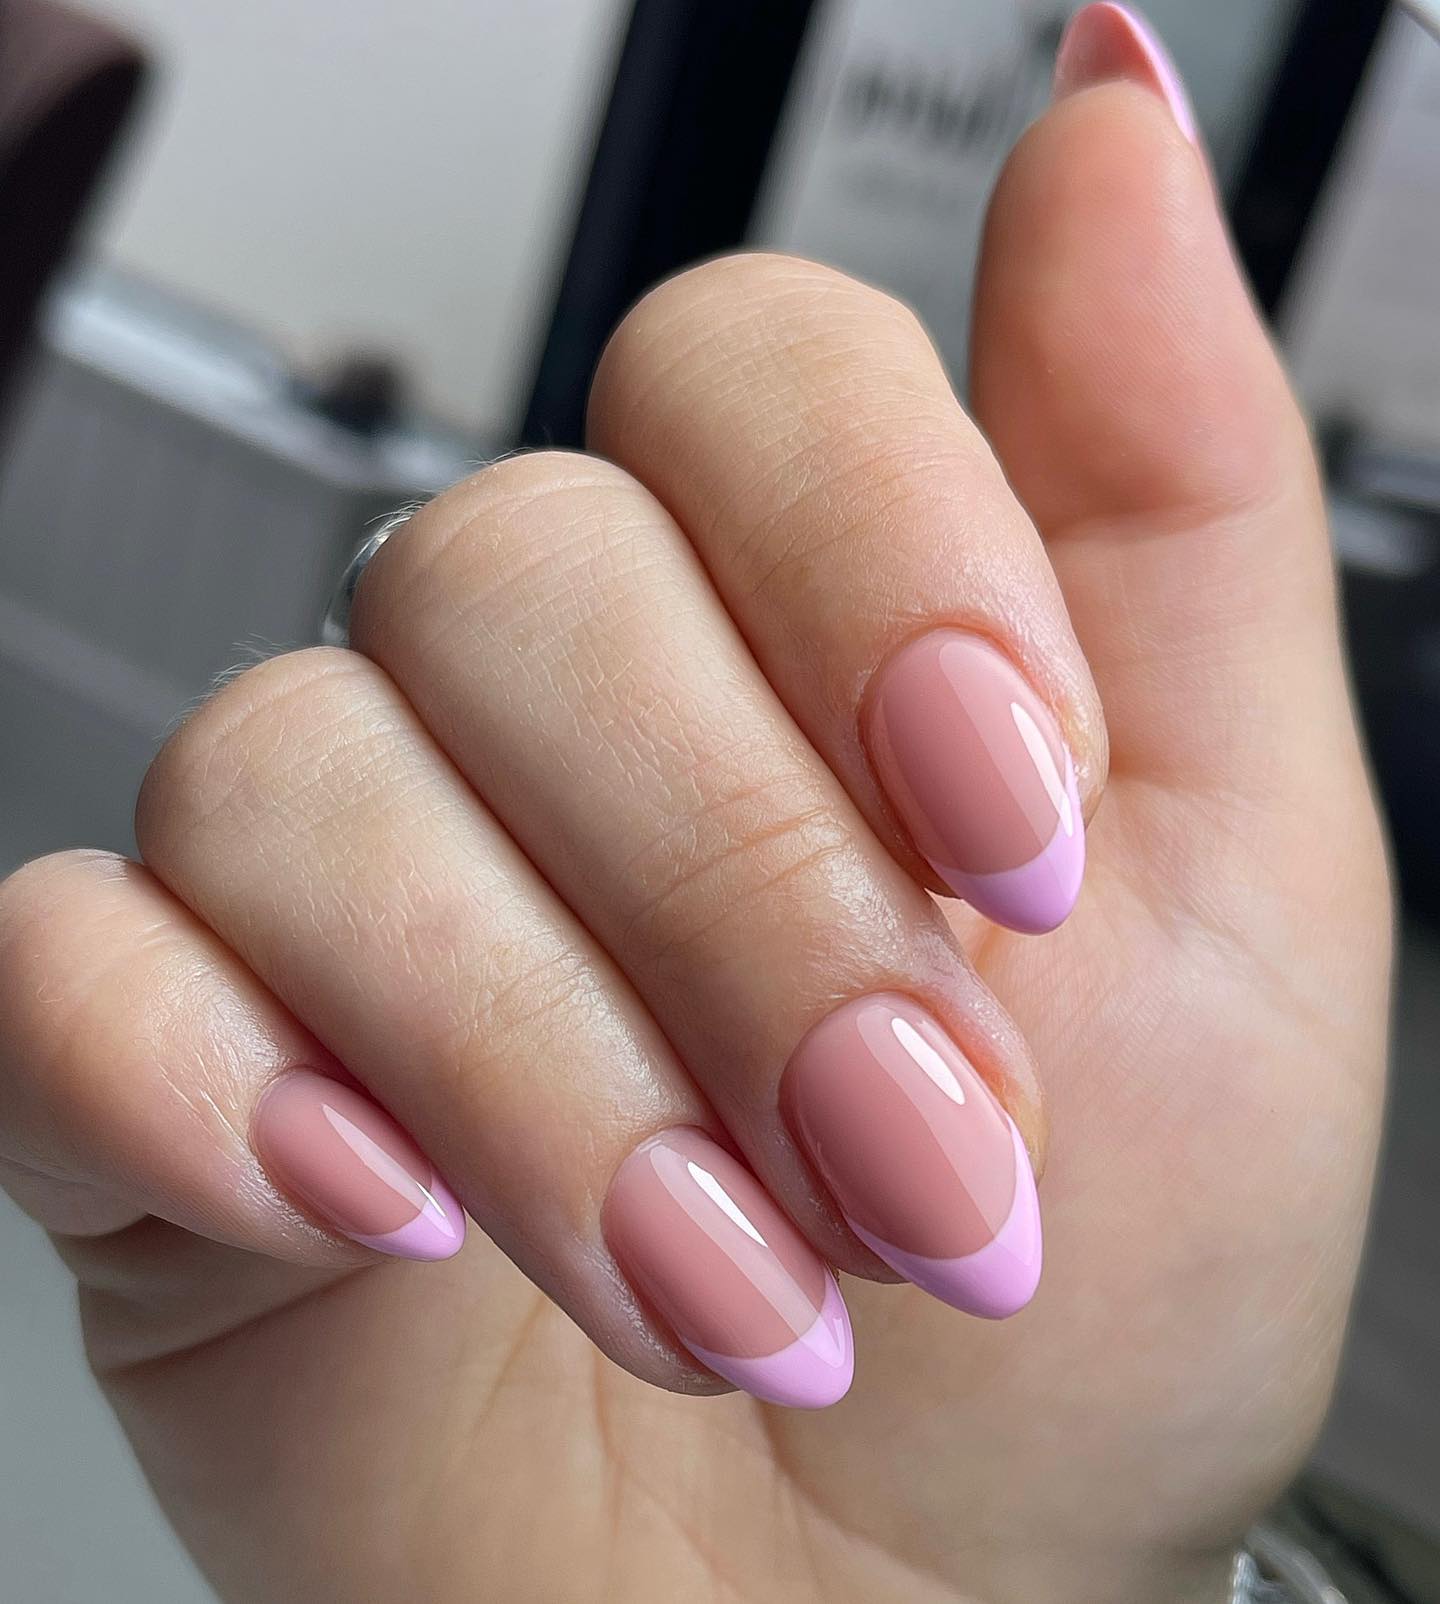 0Short Round Pale Pink French Nail Tips